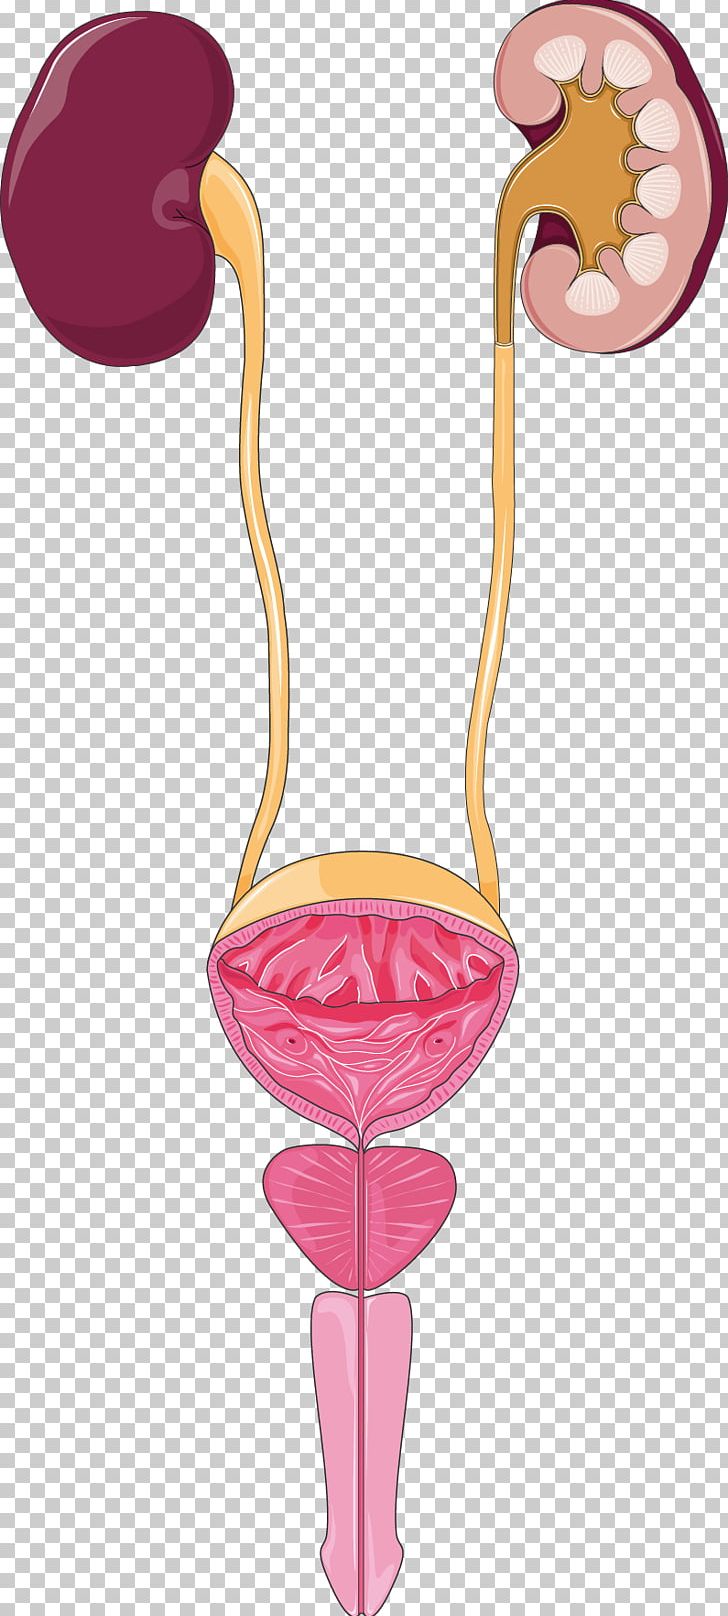 Excretory System Urine Urinary Tract Infection Kidney PNG, Clipart, Bird, Cooky, Cystitis, Disease, Drinkware Free PNG Download